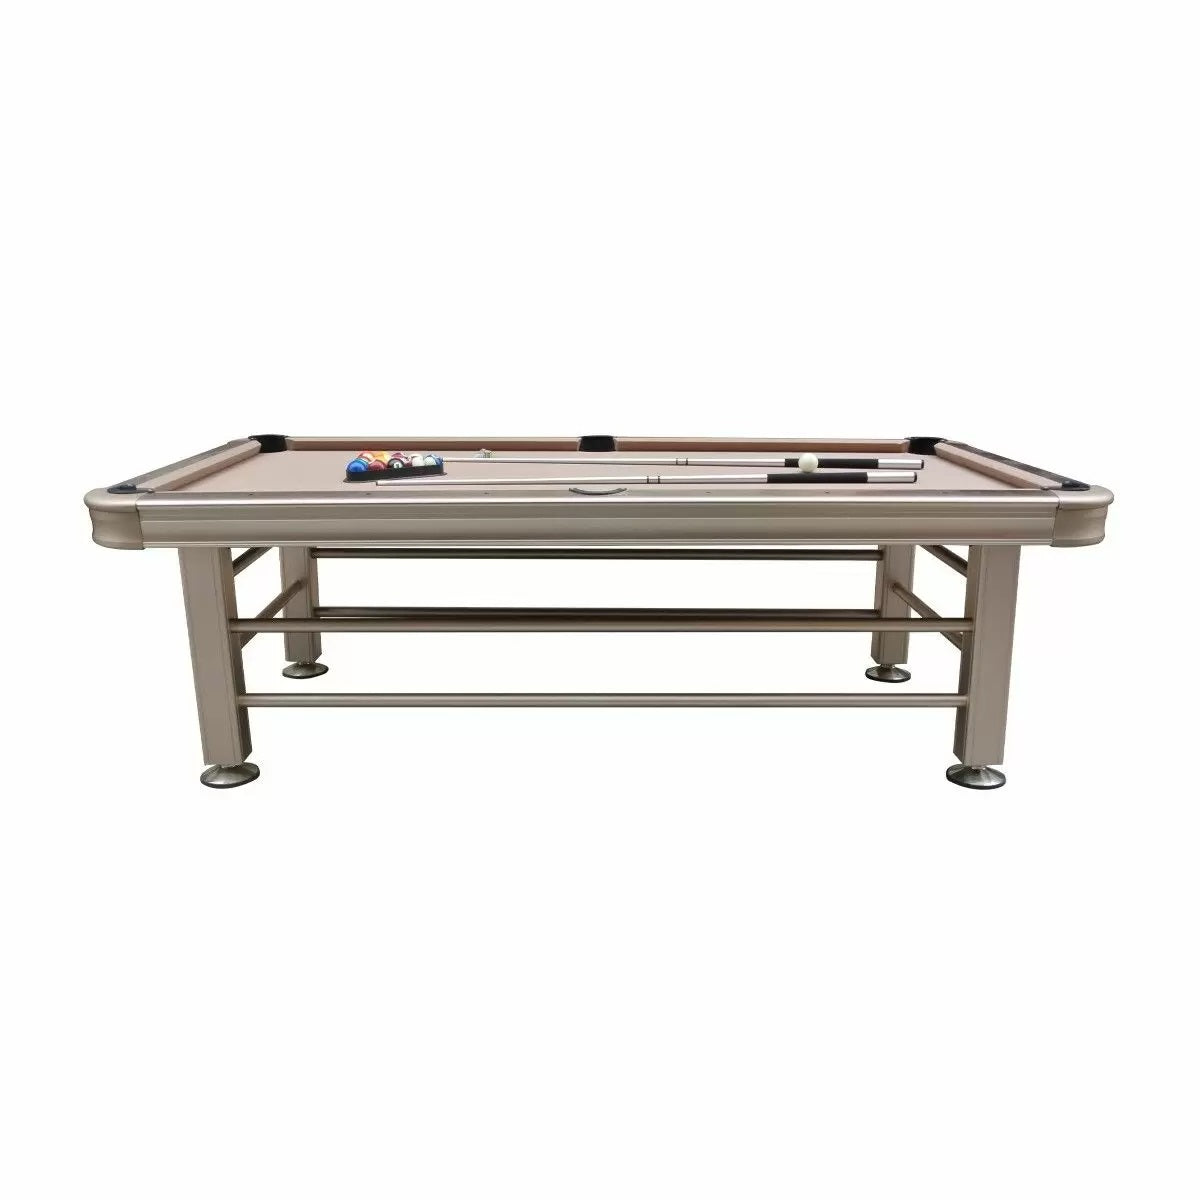 Imperial 8ft Outdoor Pool Table Champagne side